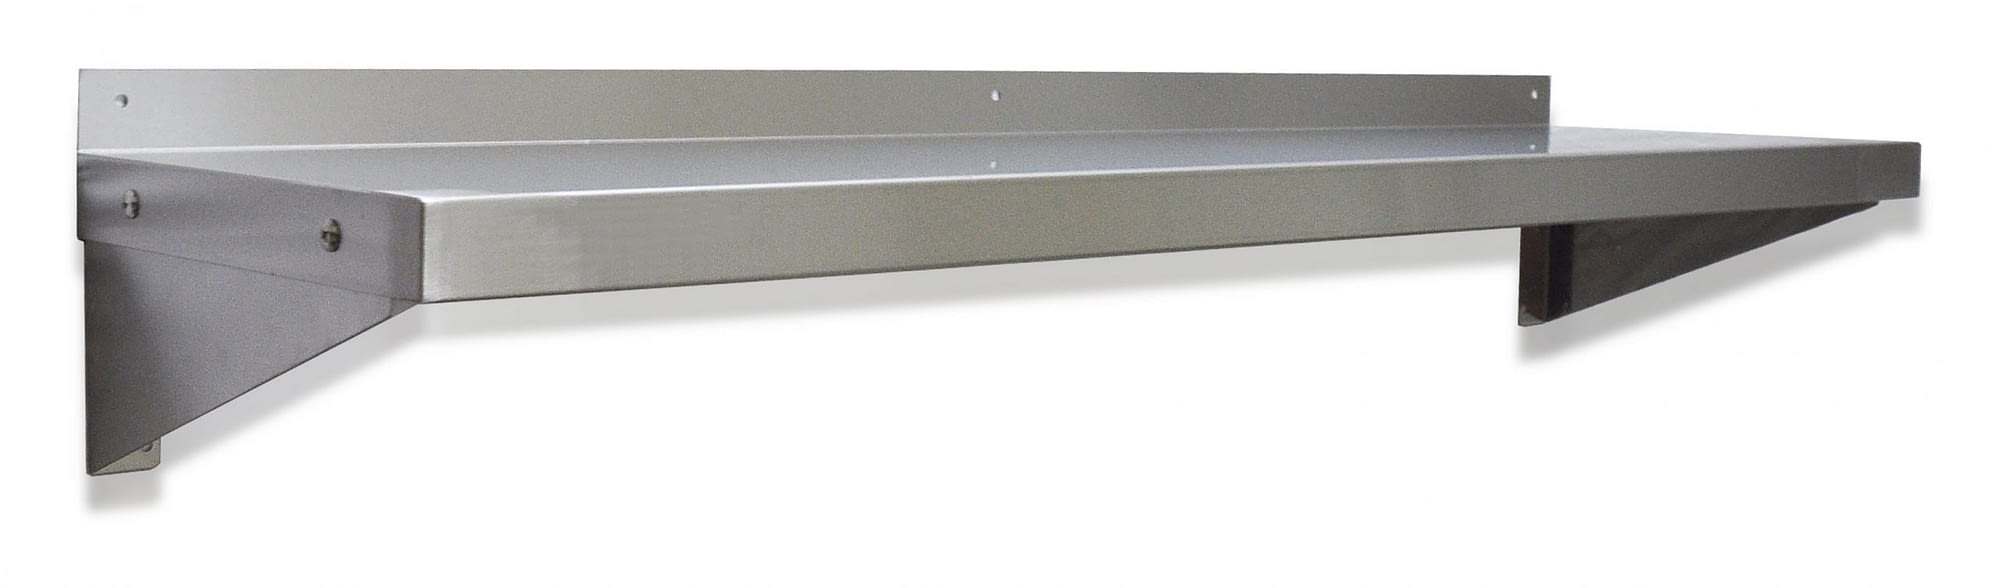 Stainless Steel Solid Wall Shelf, 1200 X 300mm deep